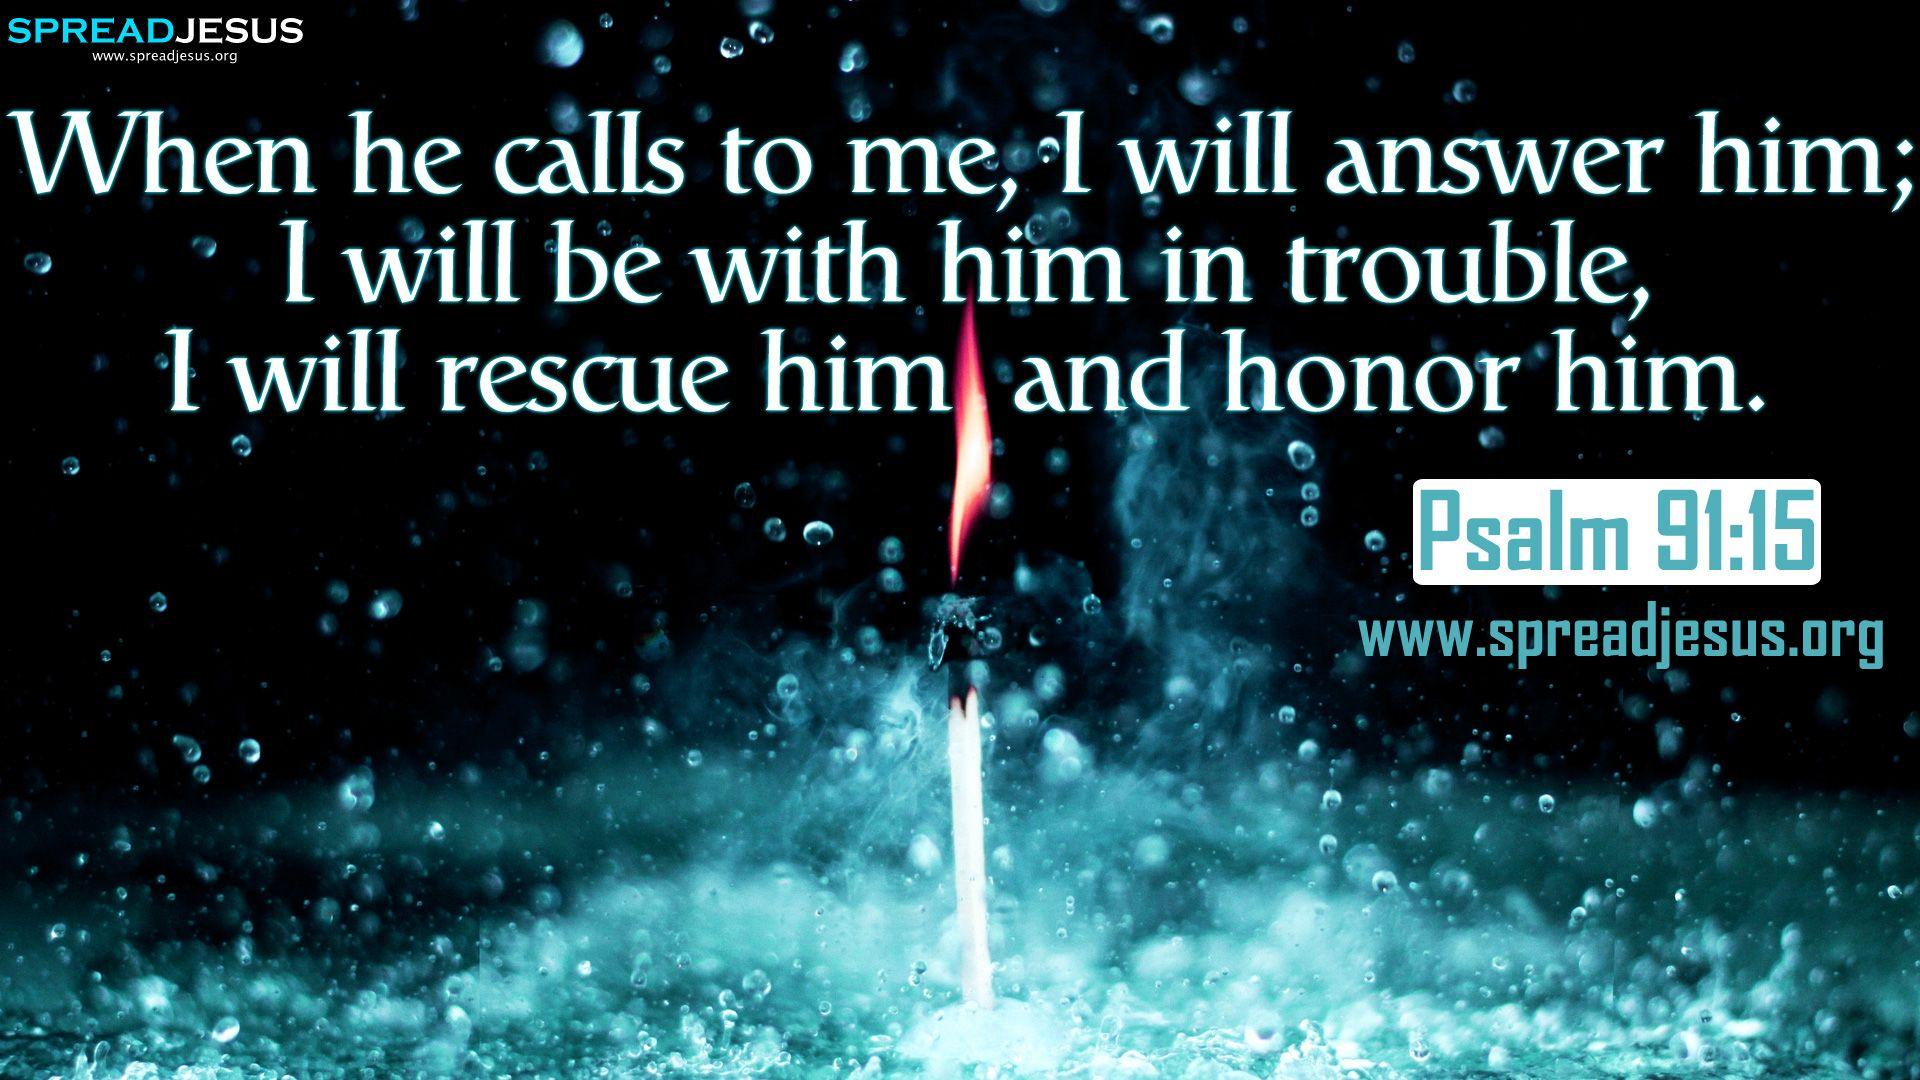 Psalm 91:15 BIBLE QUOTES HD WALLPAPERS FREE DOWNLOAD